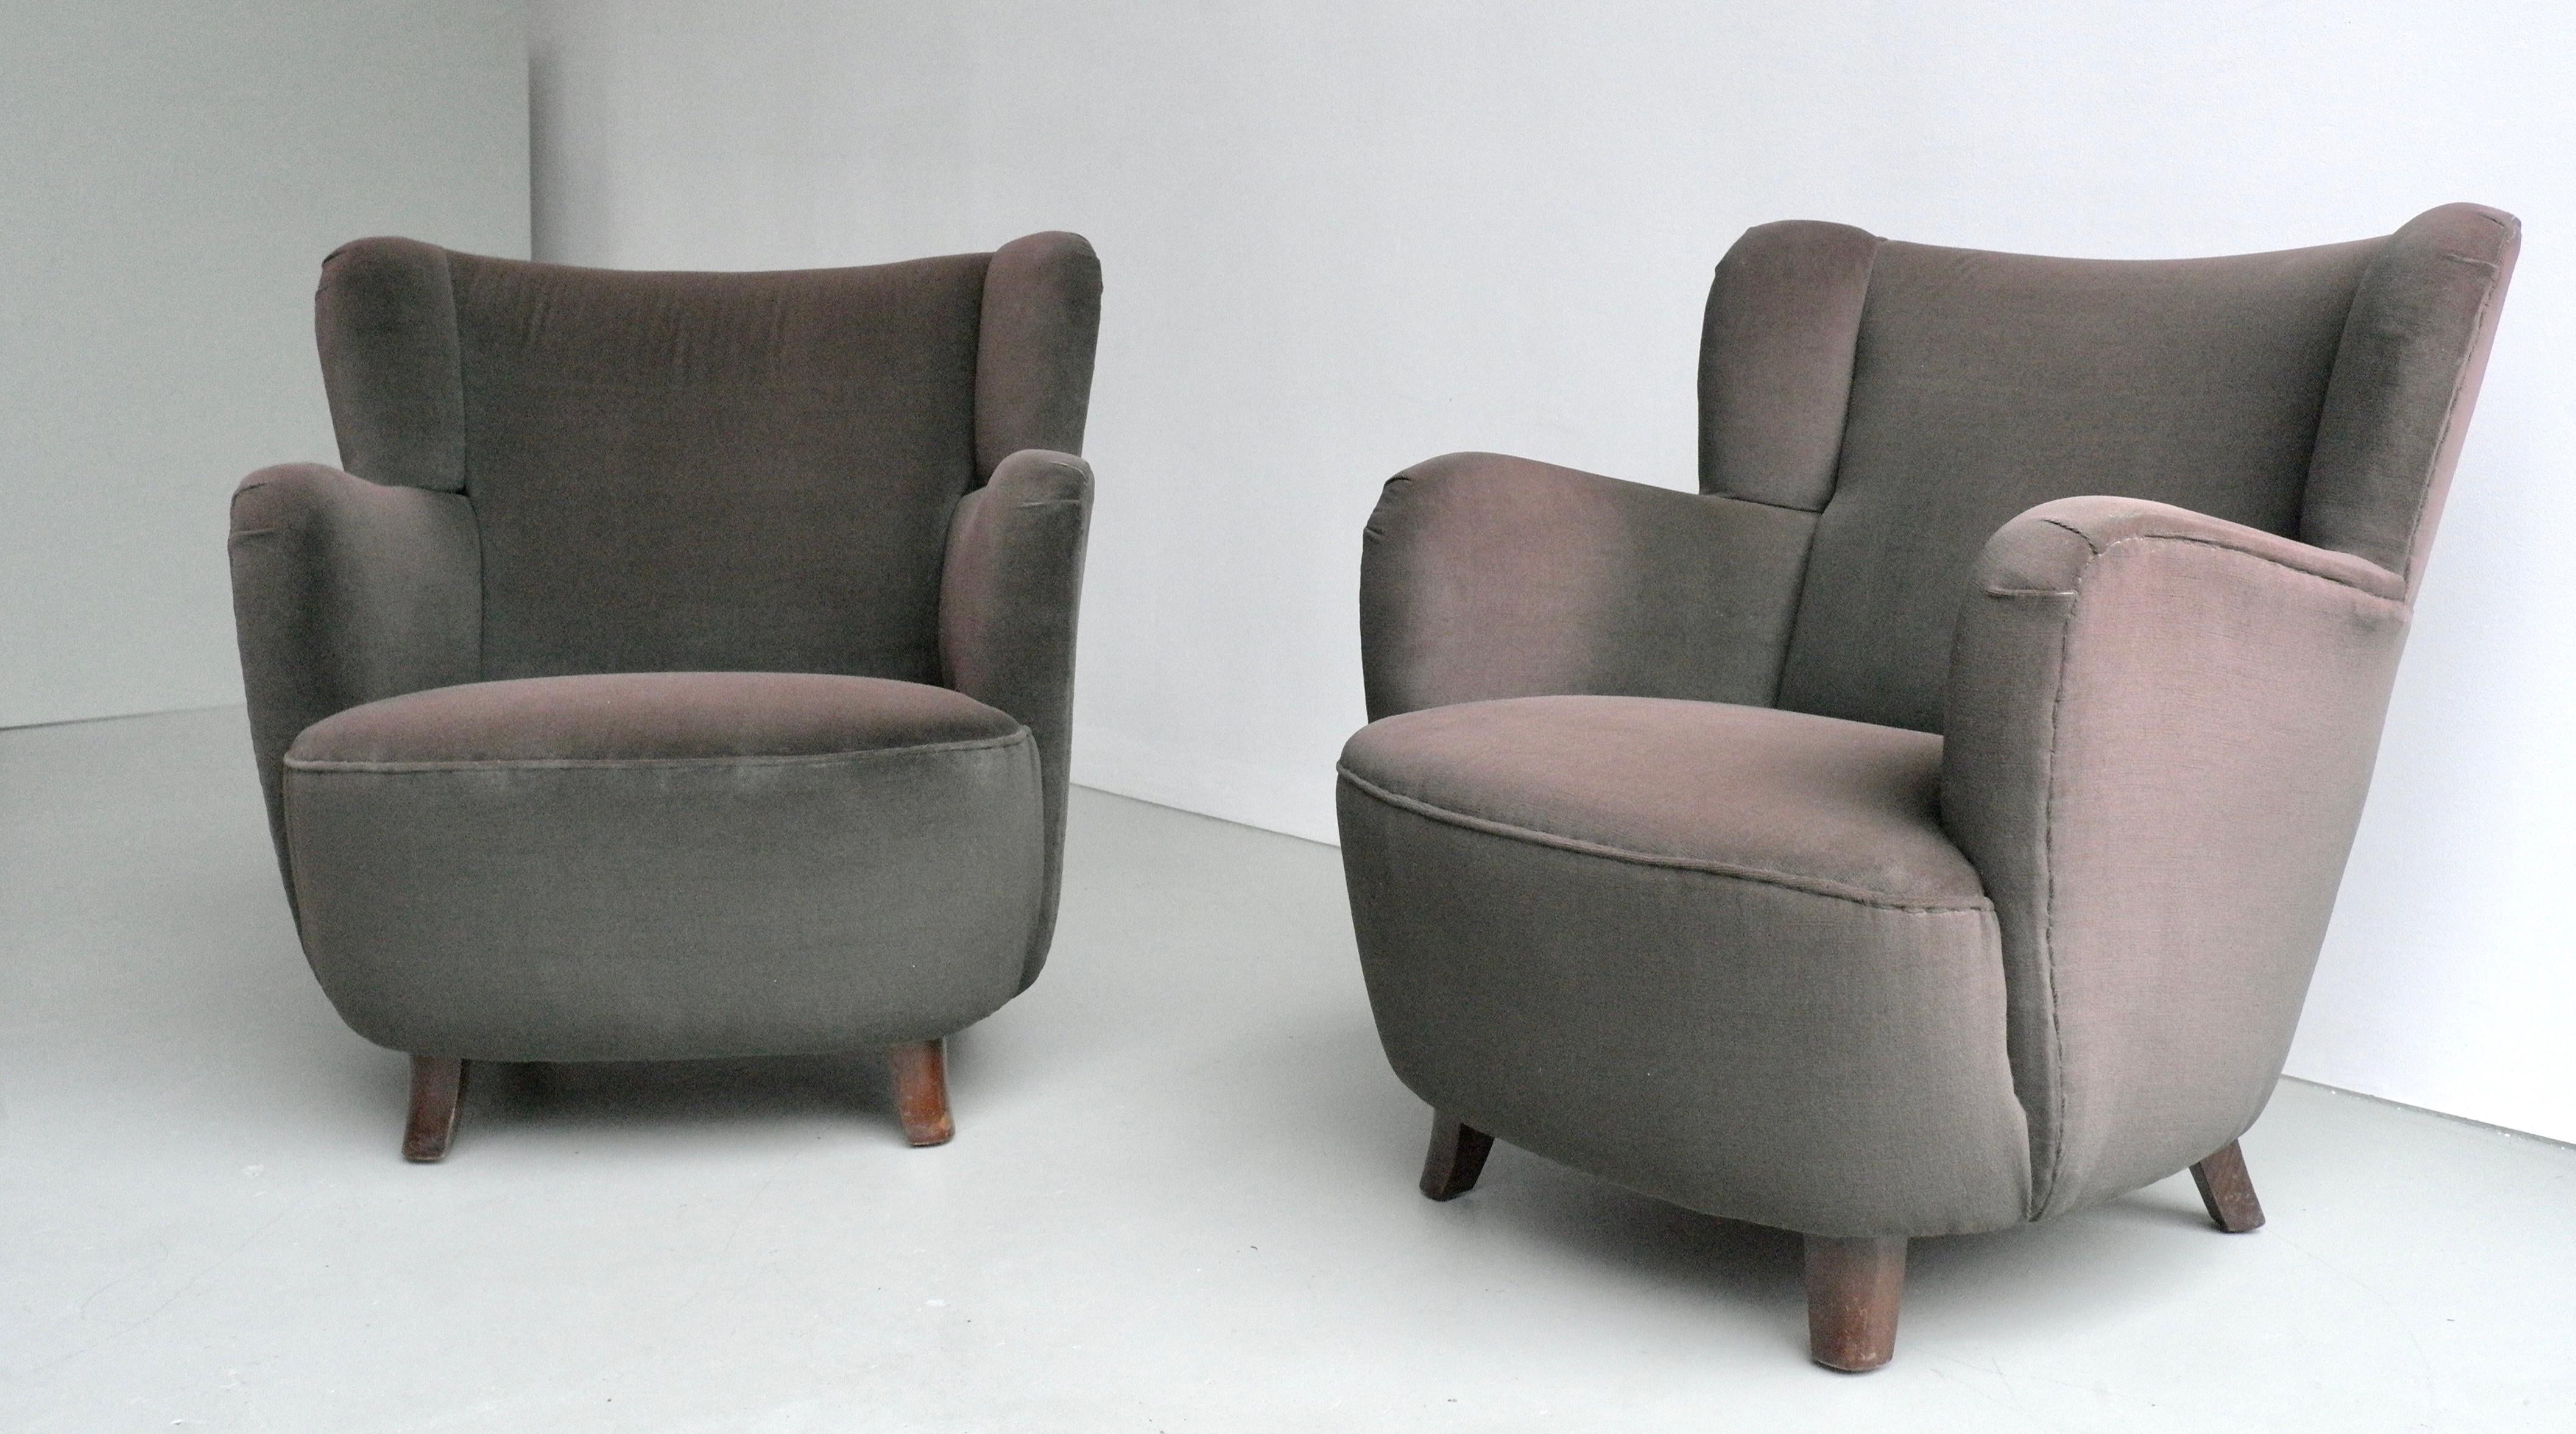 Pair of Mid-Century Modern Danish Lounge Chairs in Brown Eggplant Glow Velvet For Sale 5